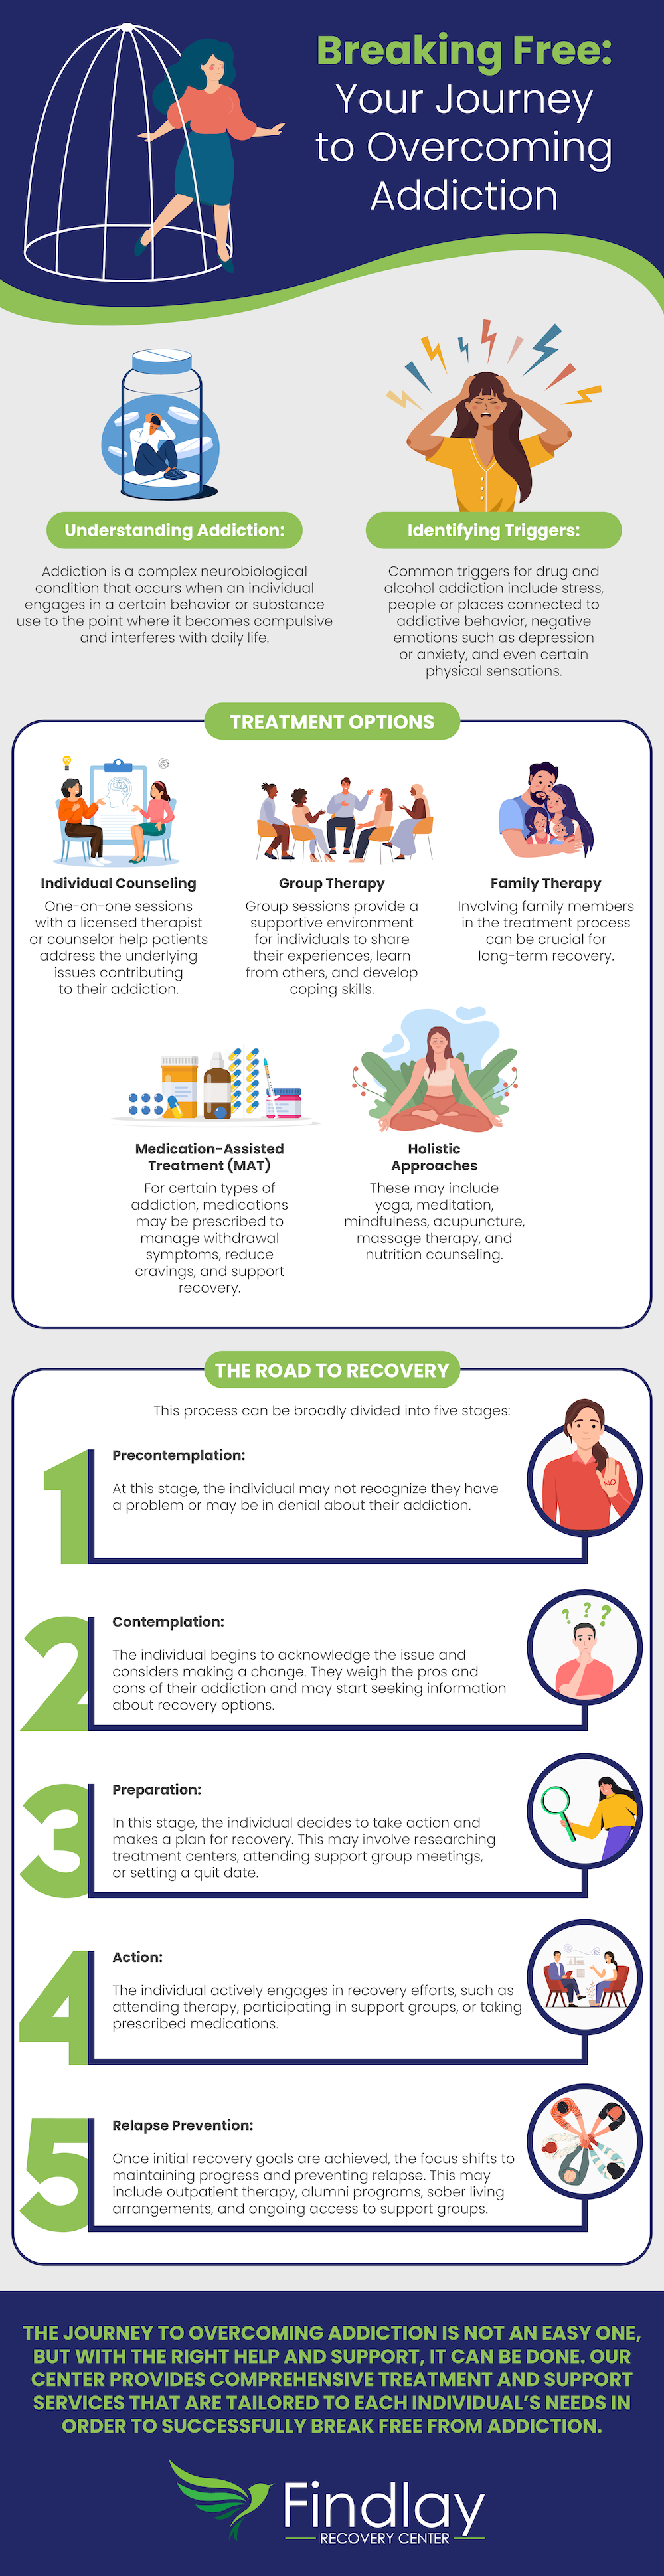 Breaking Free: Your Journey to Overcoming Addiction - Infographic